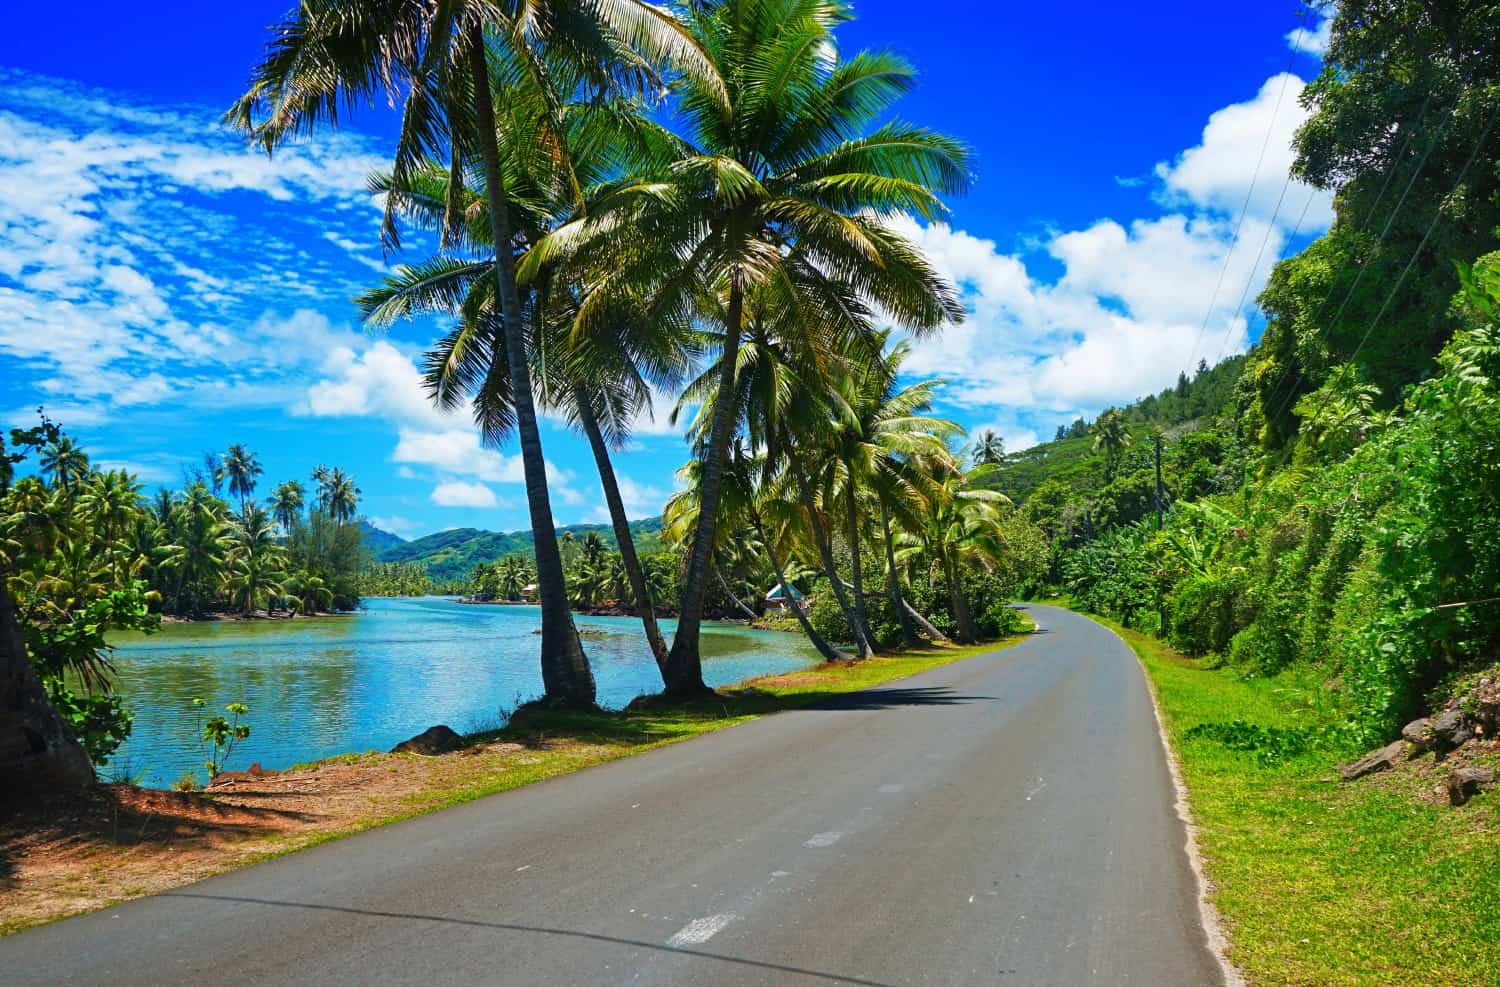 Road in Huahine, French Polynesia